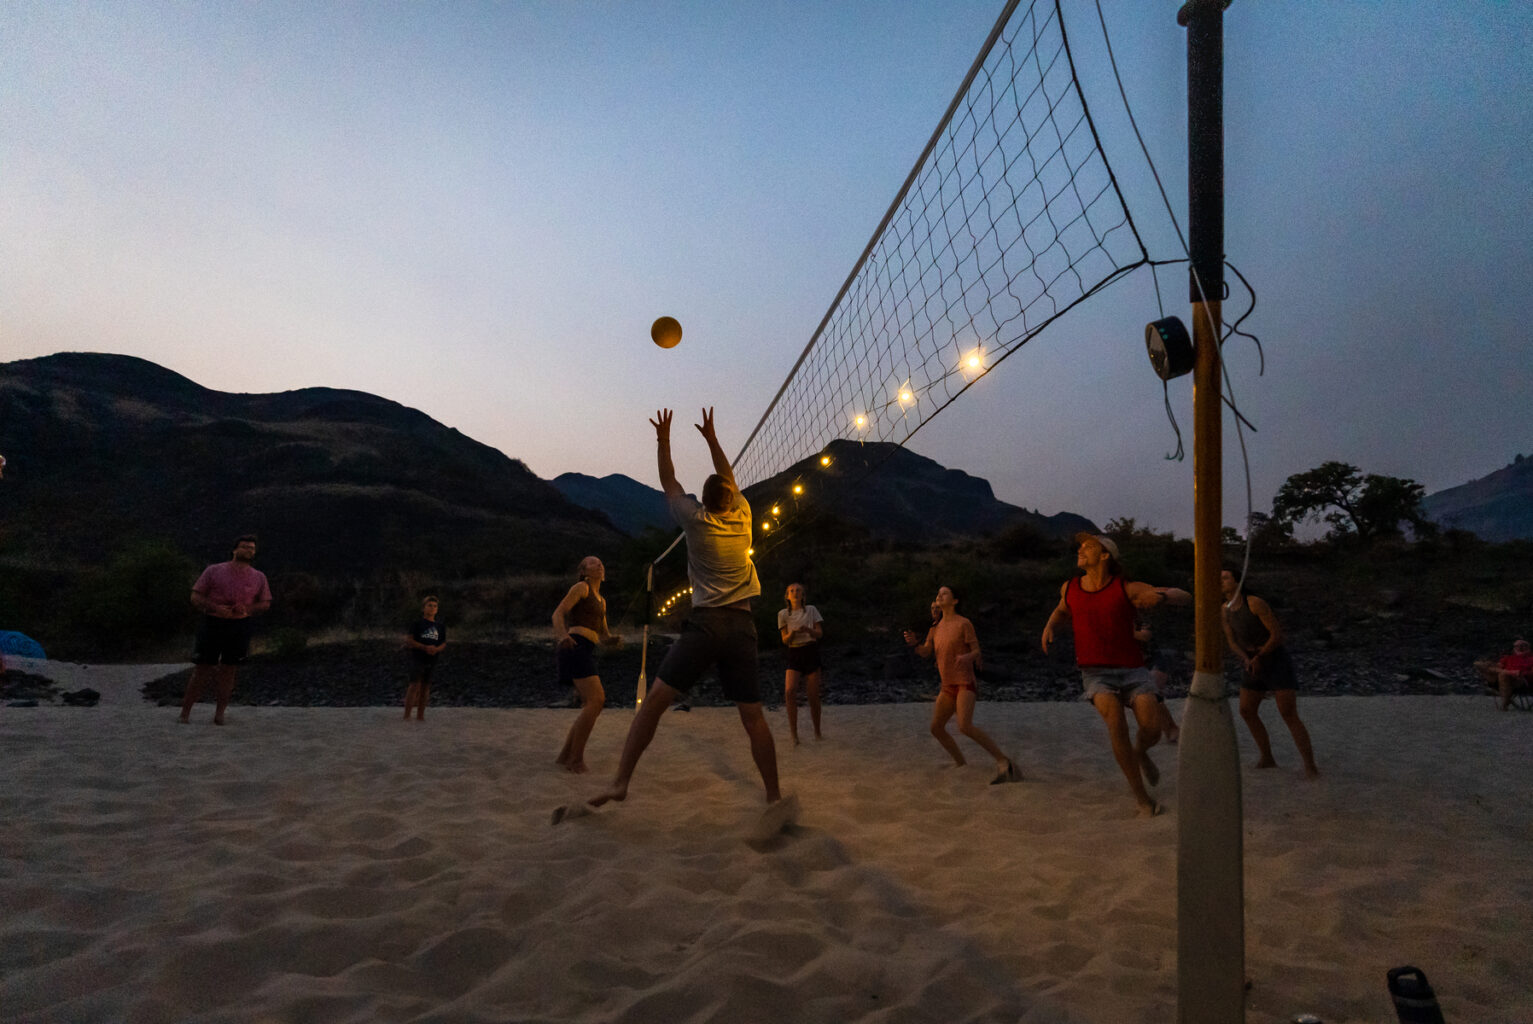 Luci solar lights illuminate an evening volleyball game on the Lower Salmon River